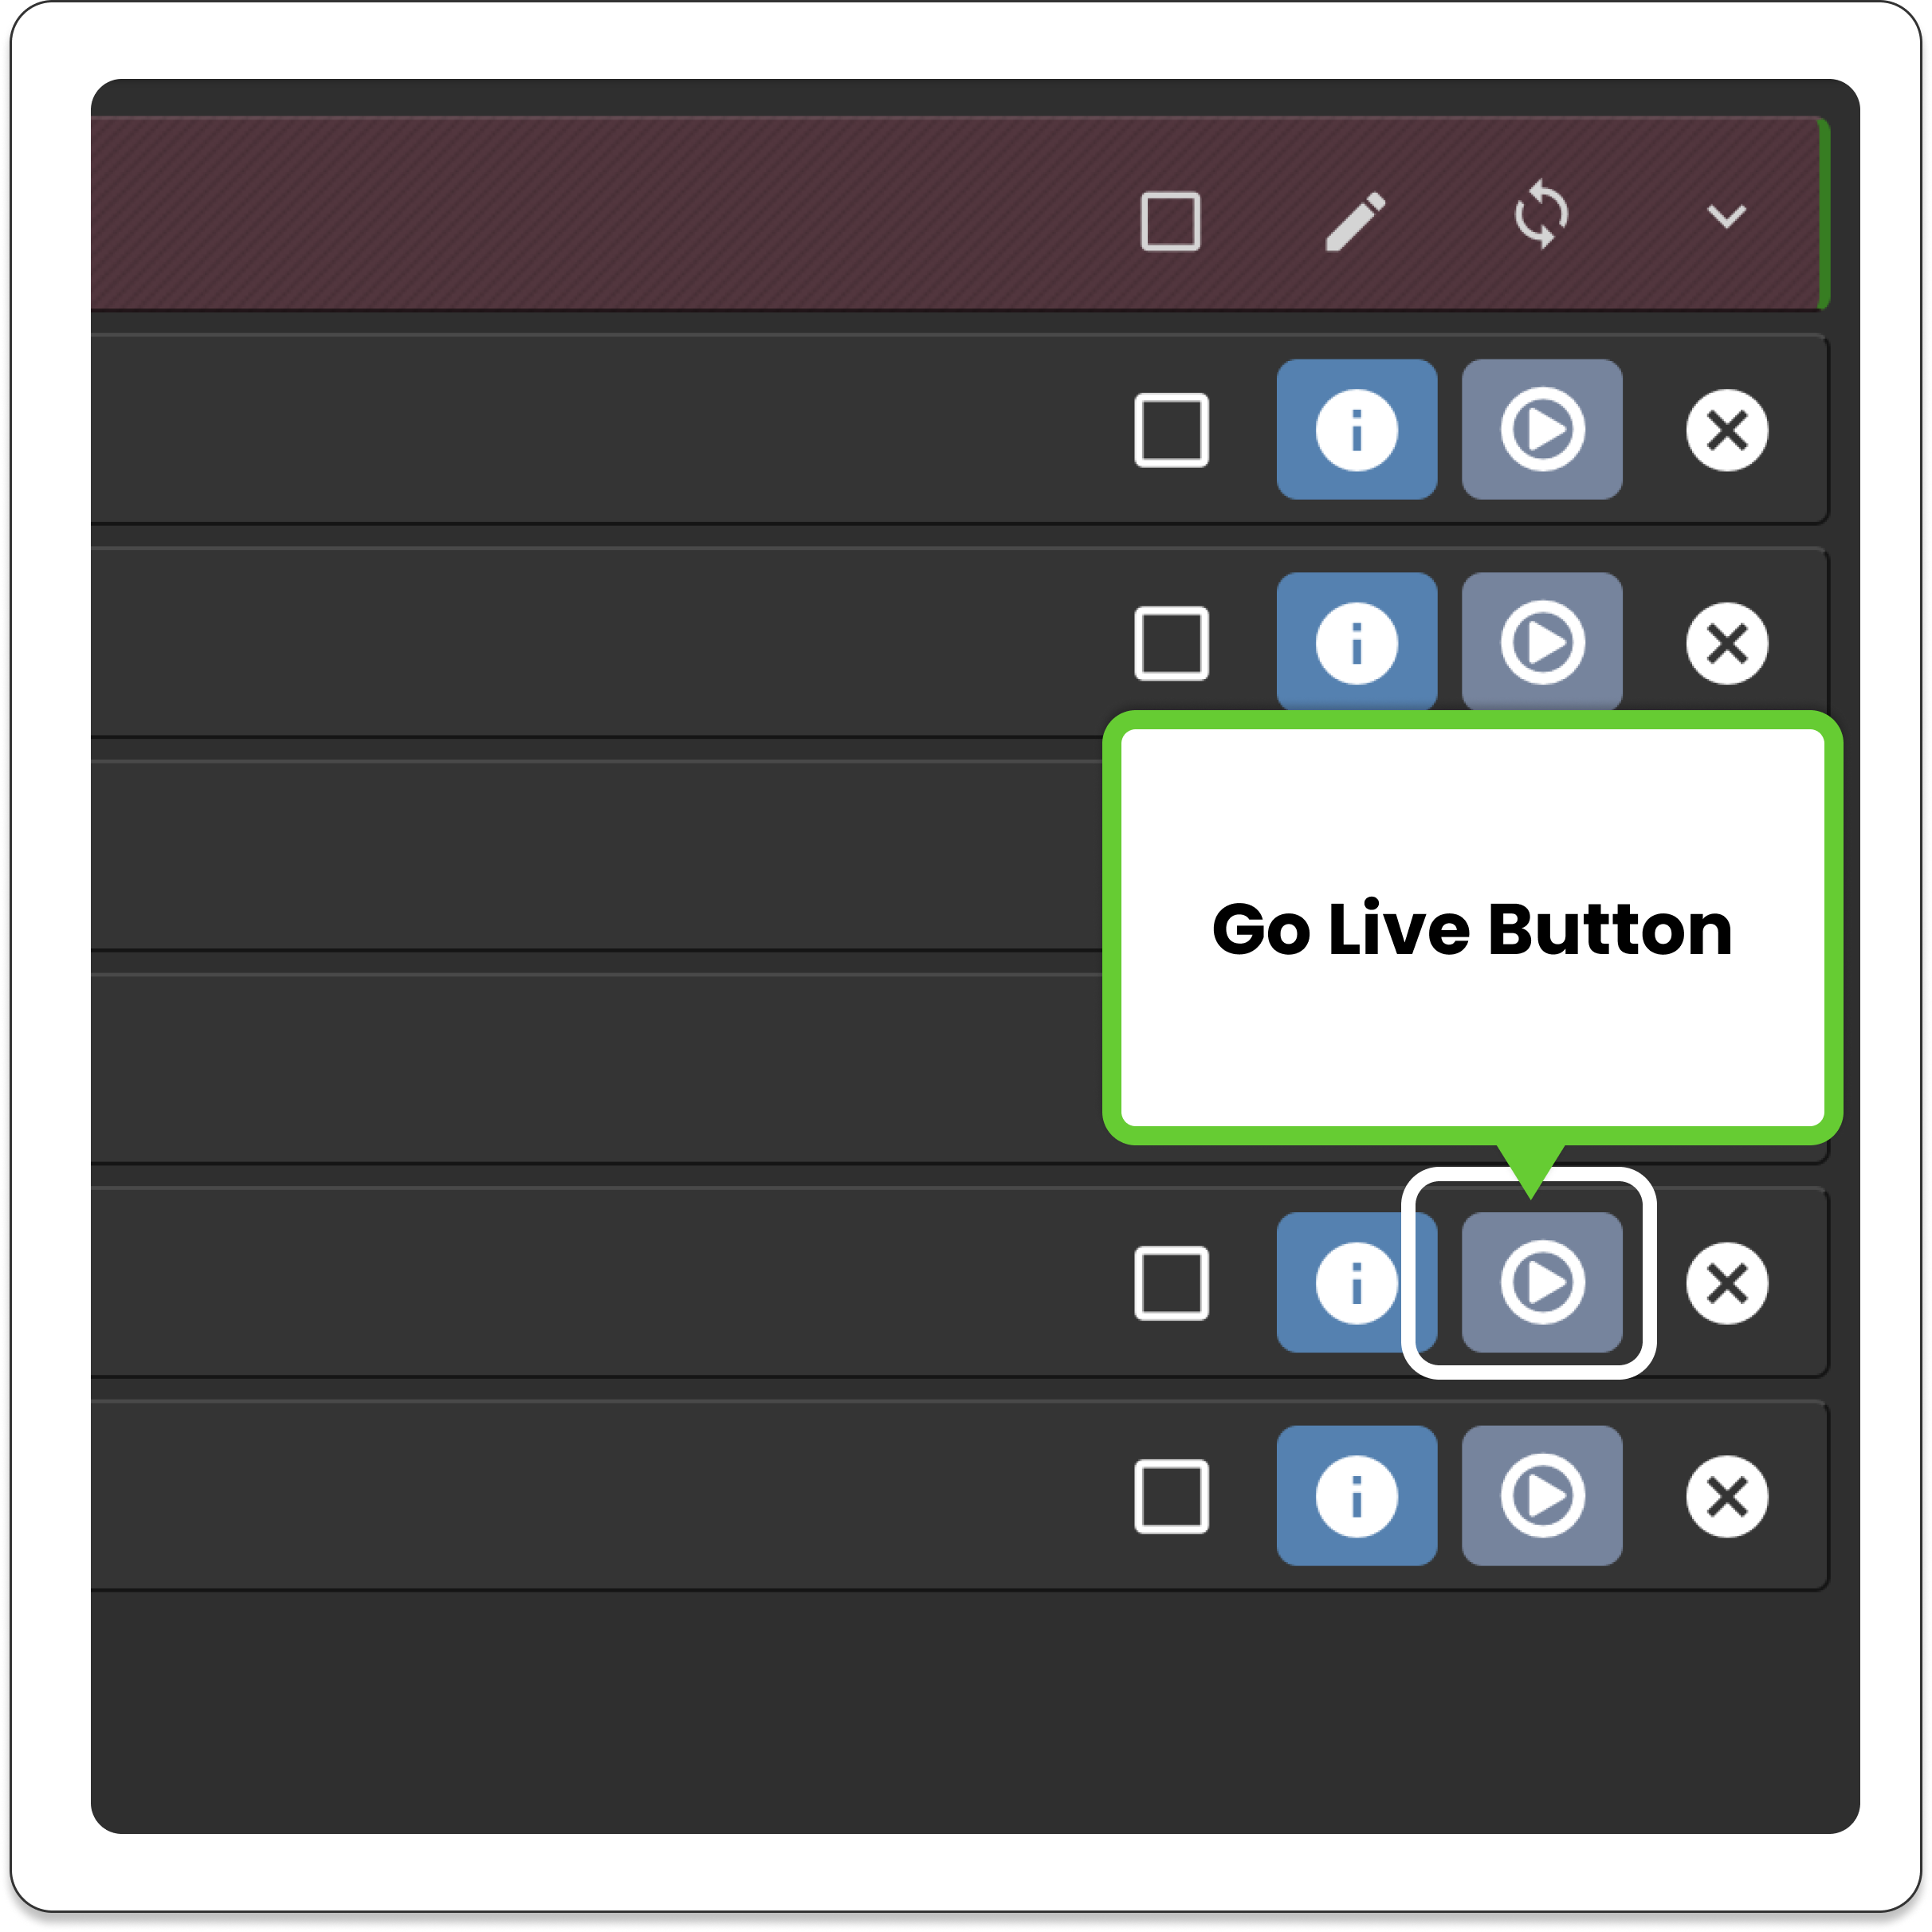 switchboardlive_workflow-page_destinations_pane_gray_go_live_button.png